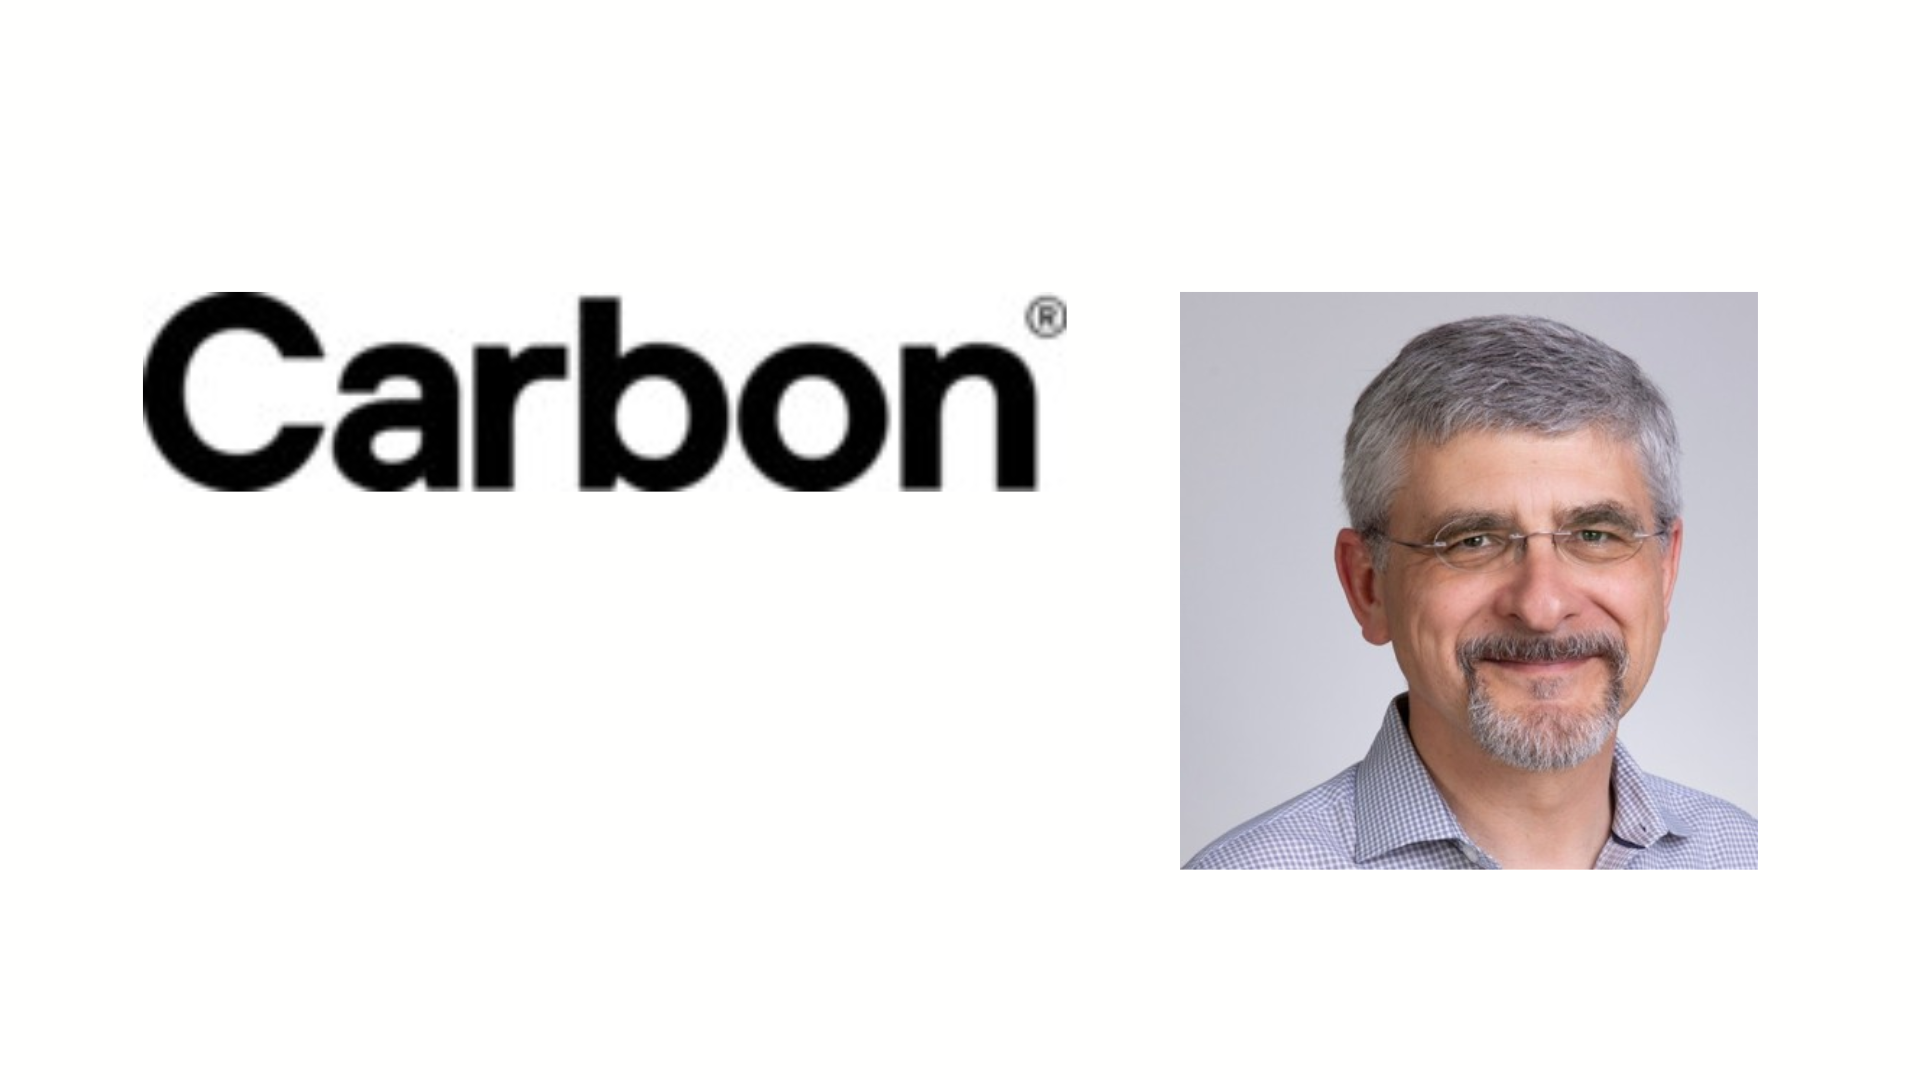  Carbon announced the appointment of Vincent Rerolle as Senior Vice President of Corporate Development, reporting directly to the Office of the CEO.